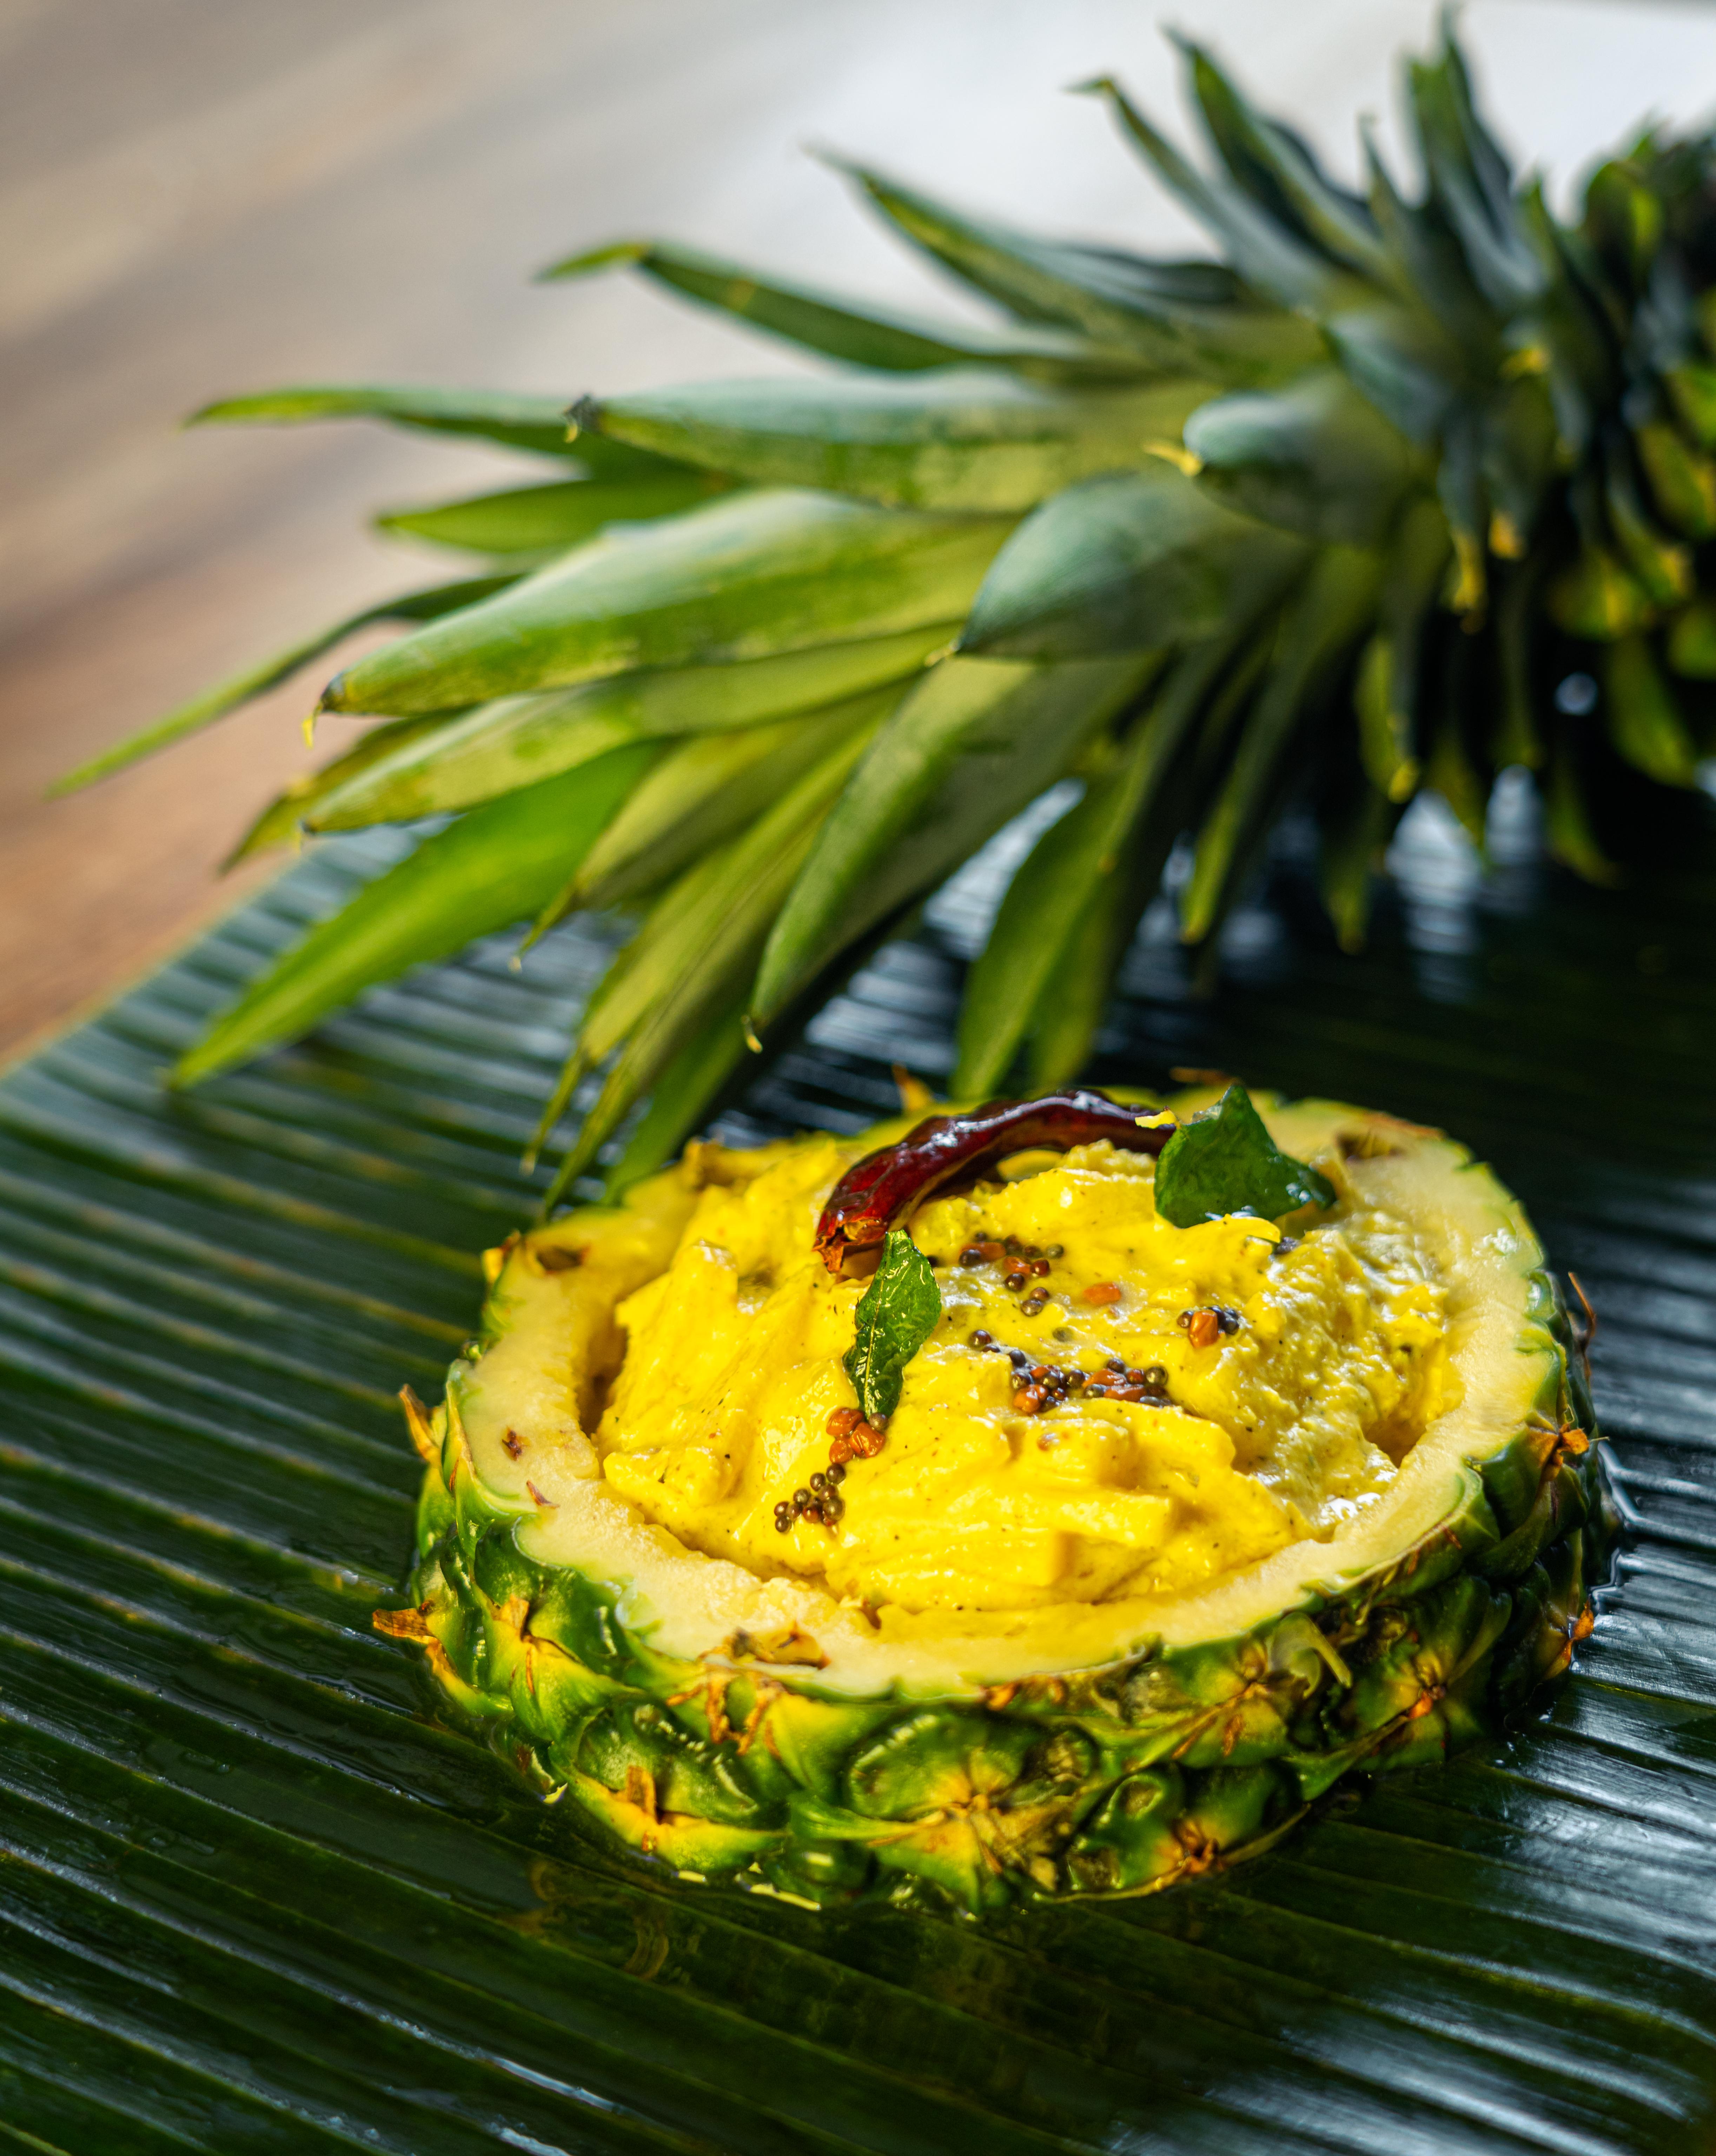 A sectioned pineapple filled with a creamy yellow dip onto of a banana leaf. The crown of the pineapple is placed behind it.